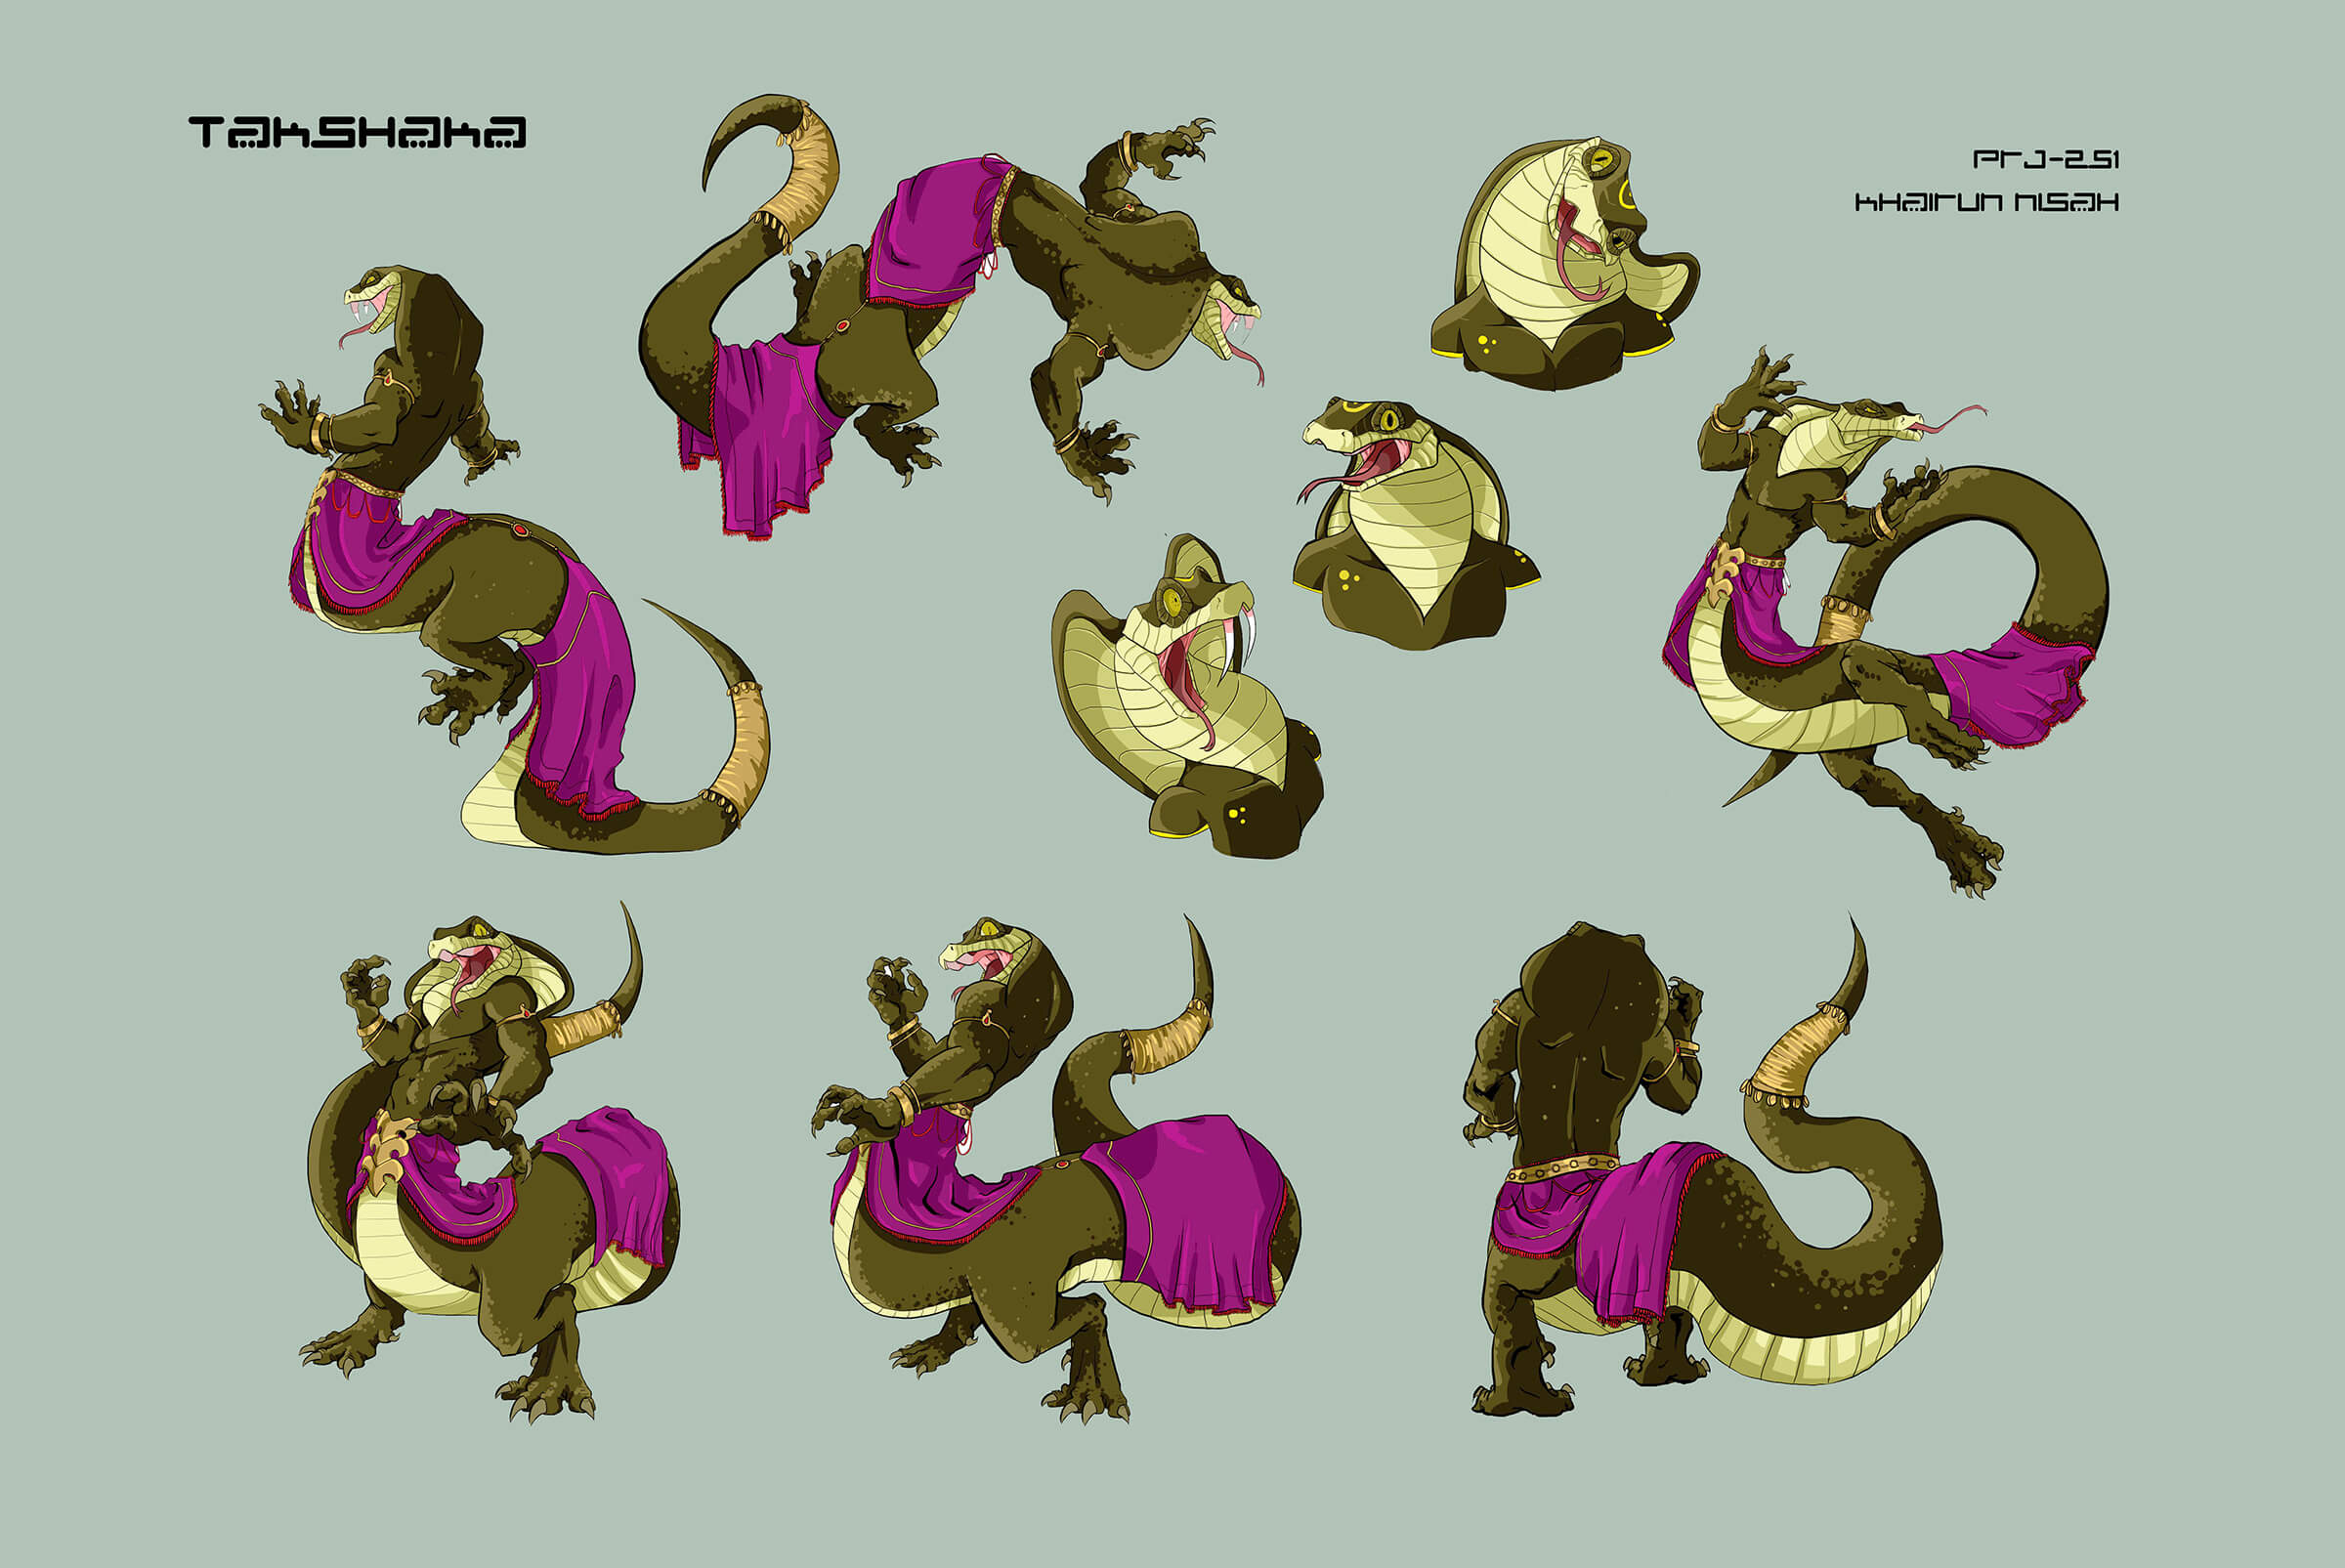 Character sketches of a green naga-like creature in a purple skirt as it dances and delivers various reactions.